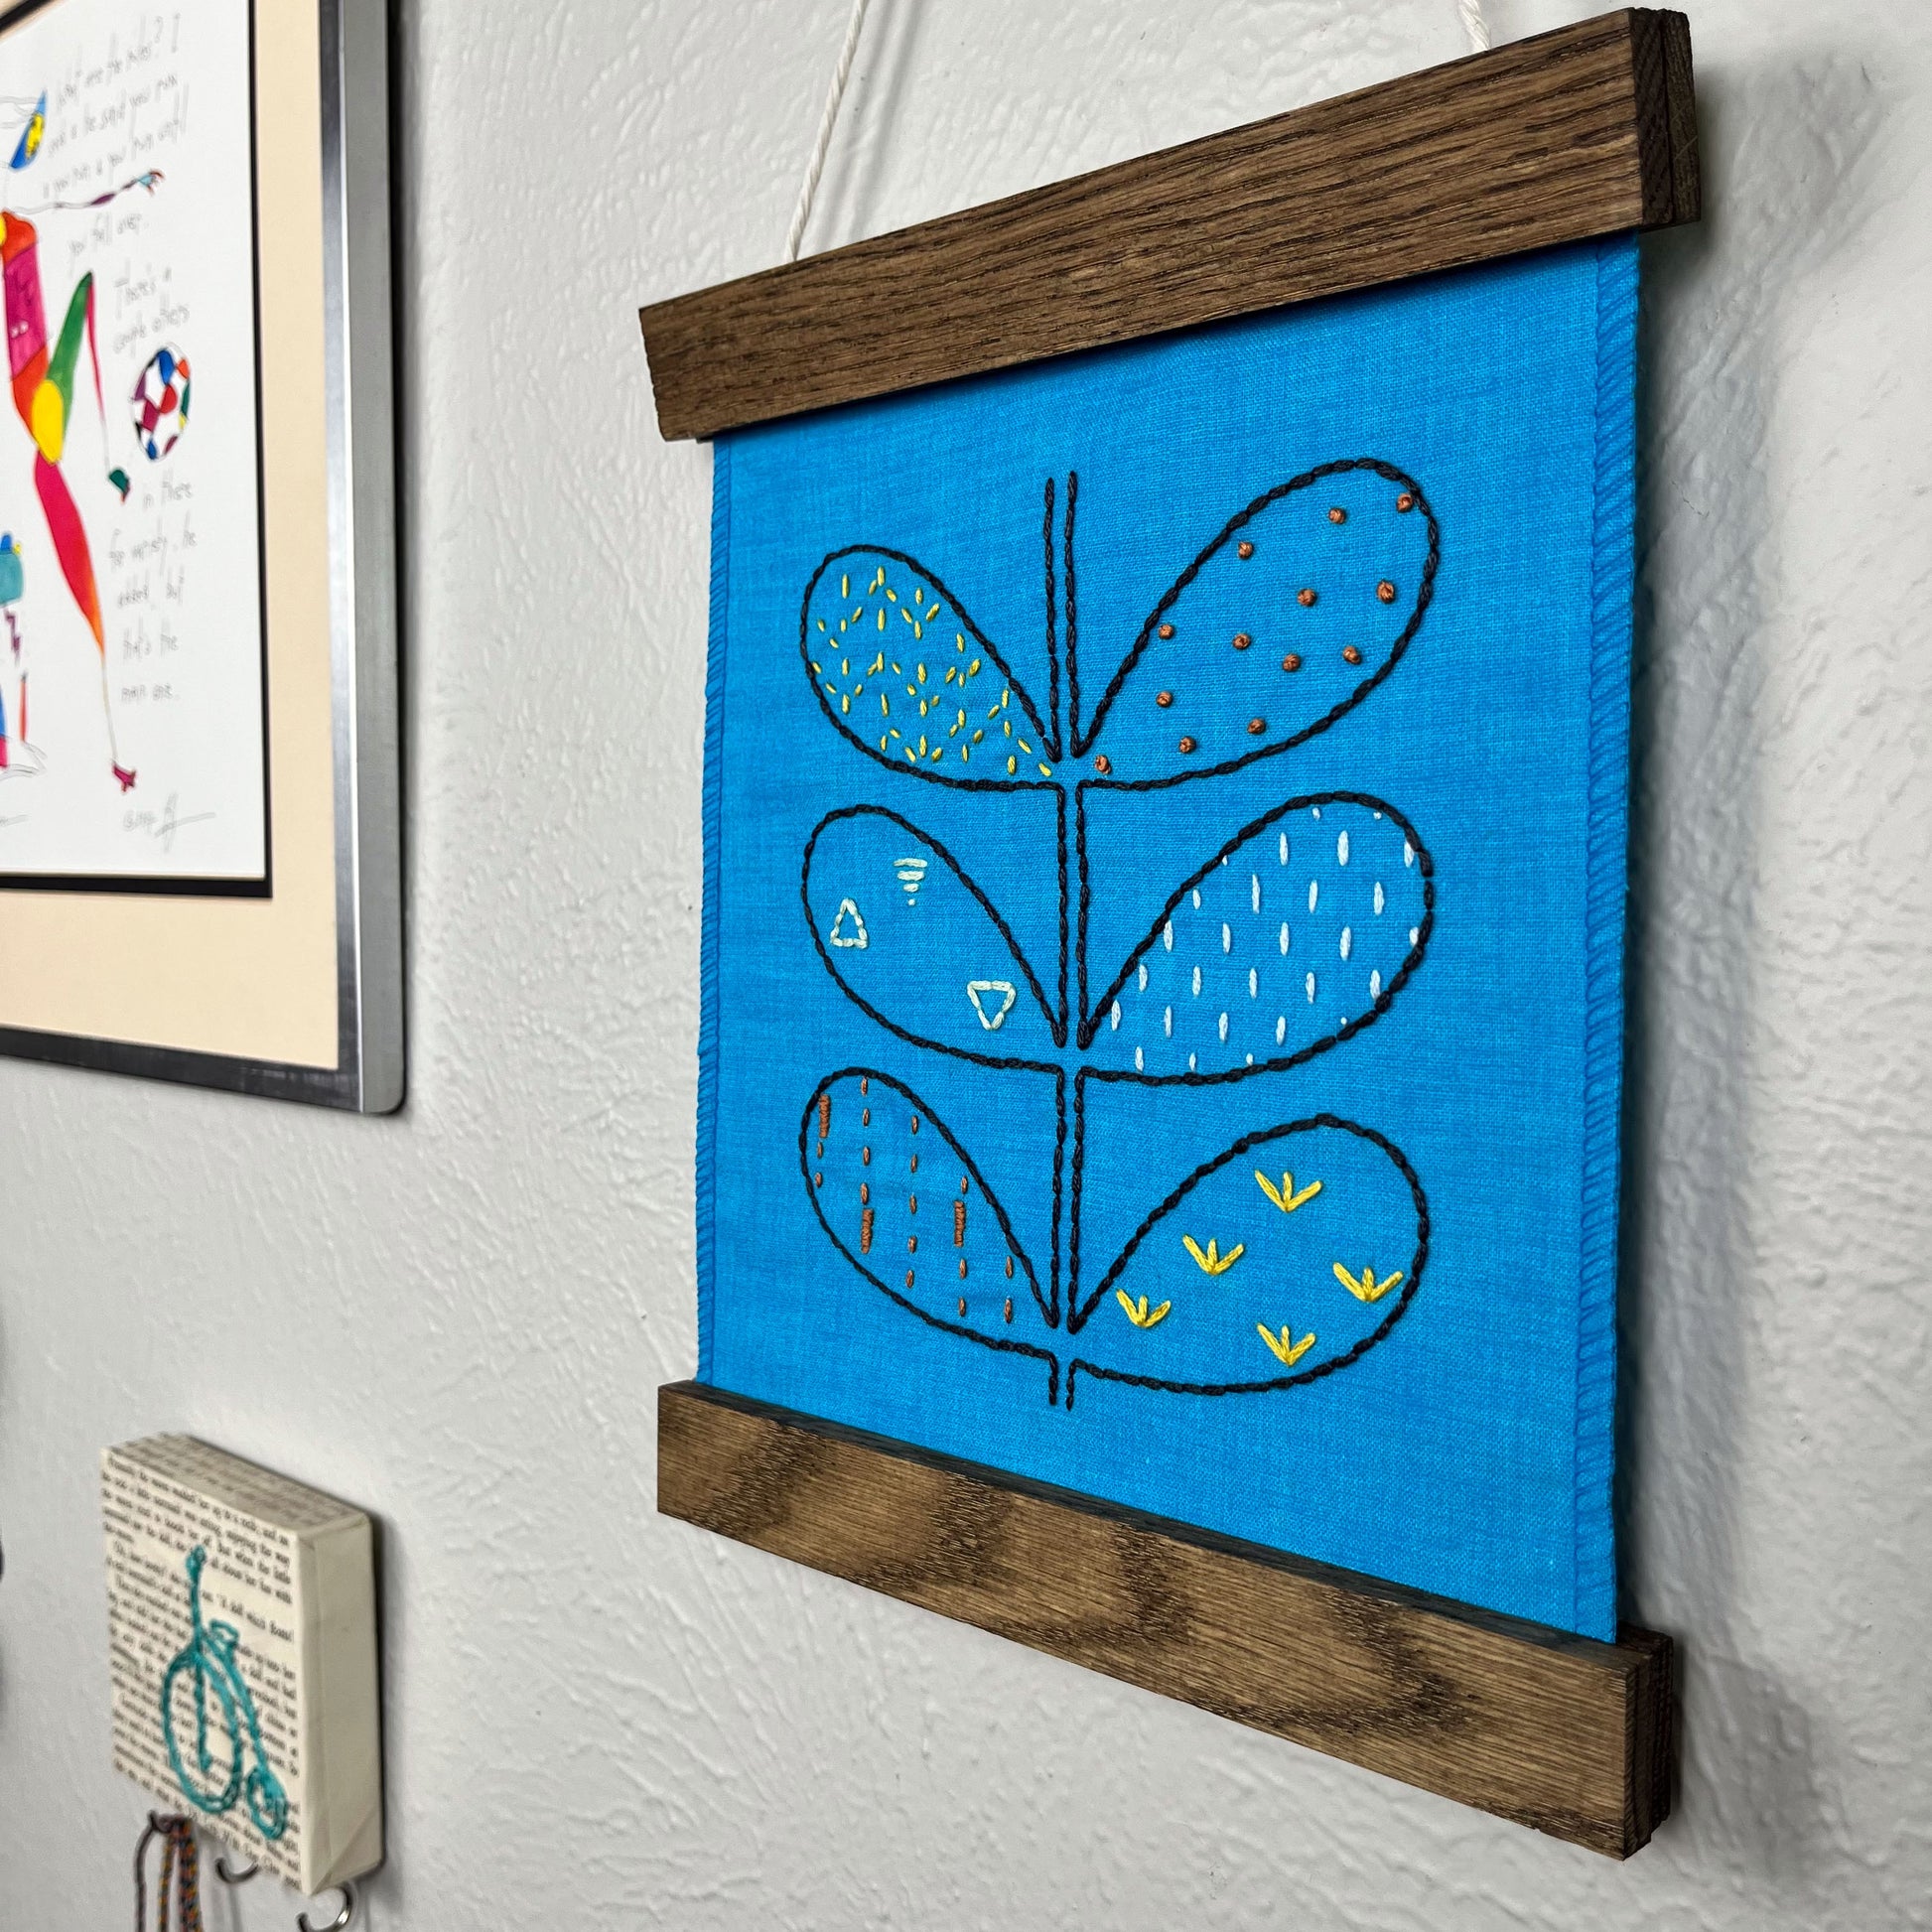 a small bright blue fabric wall hangings, in a magnetic wood frame, hand embroidered with the outline of symmetrical petals on a stem, each petal filled with different stitches like french knots, running stitches and triangles, in different colors